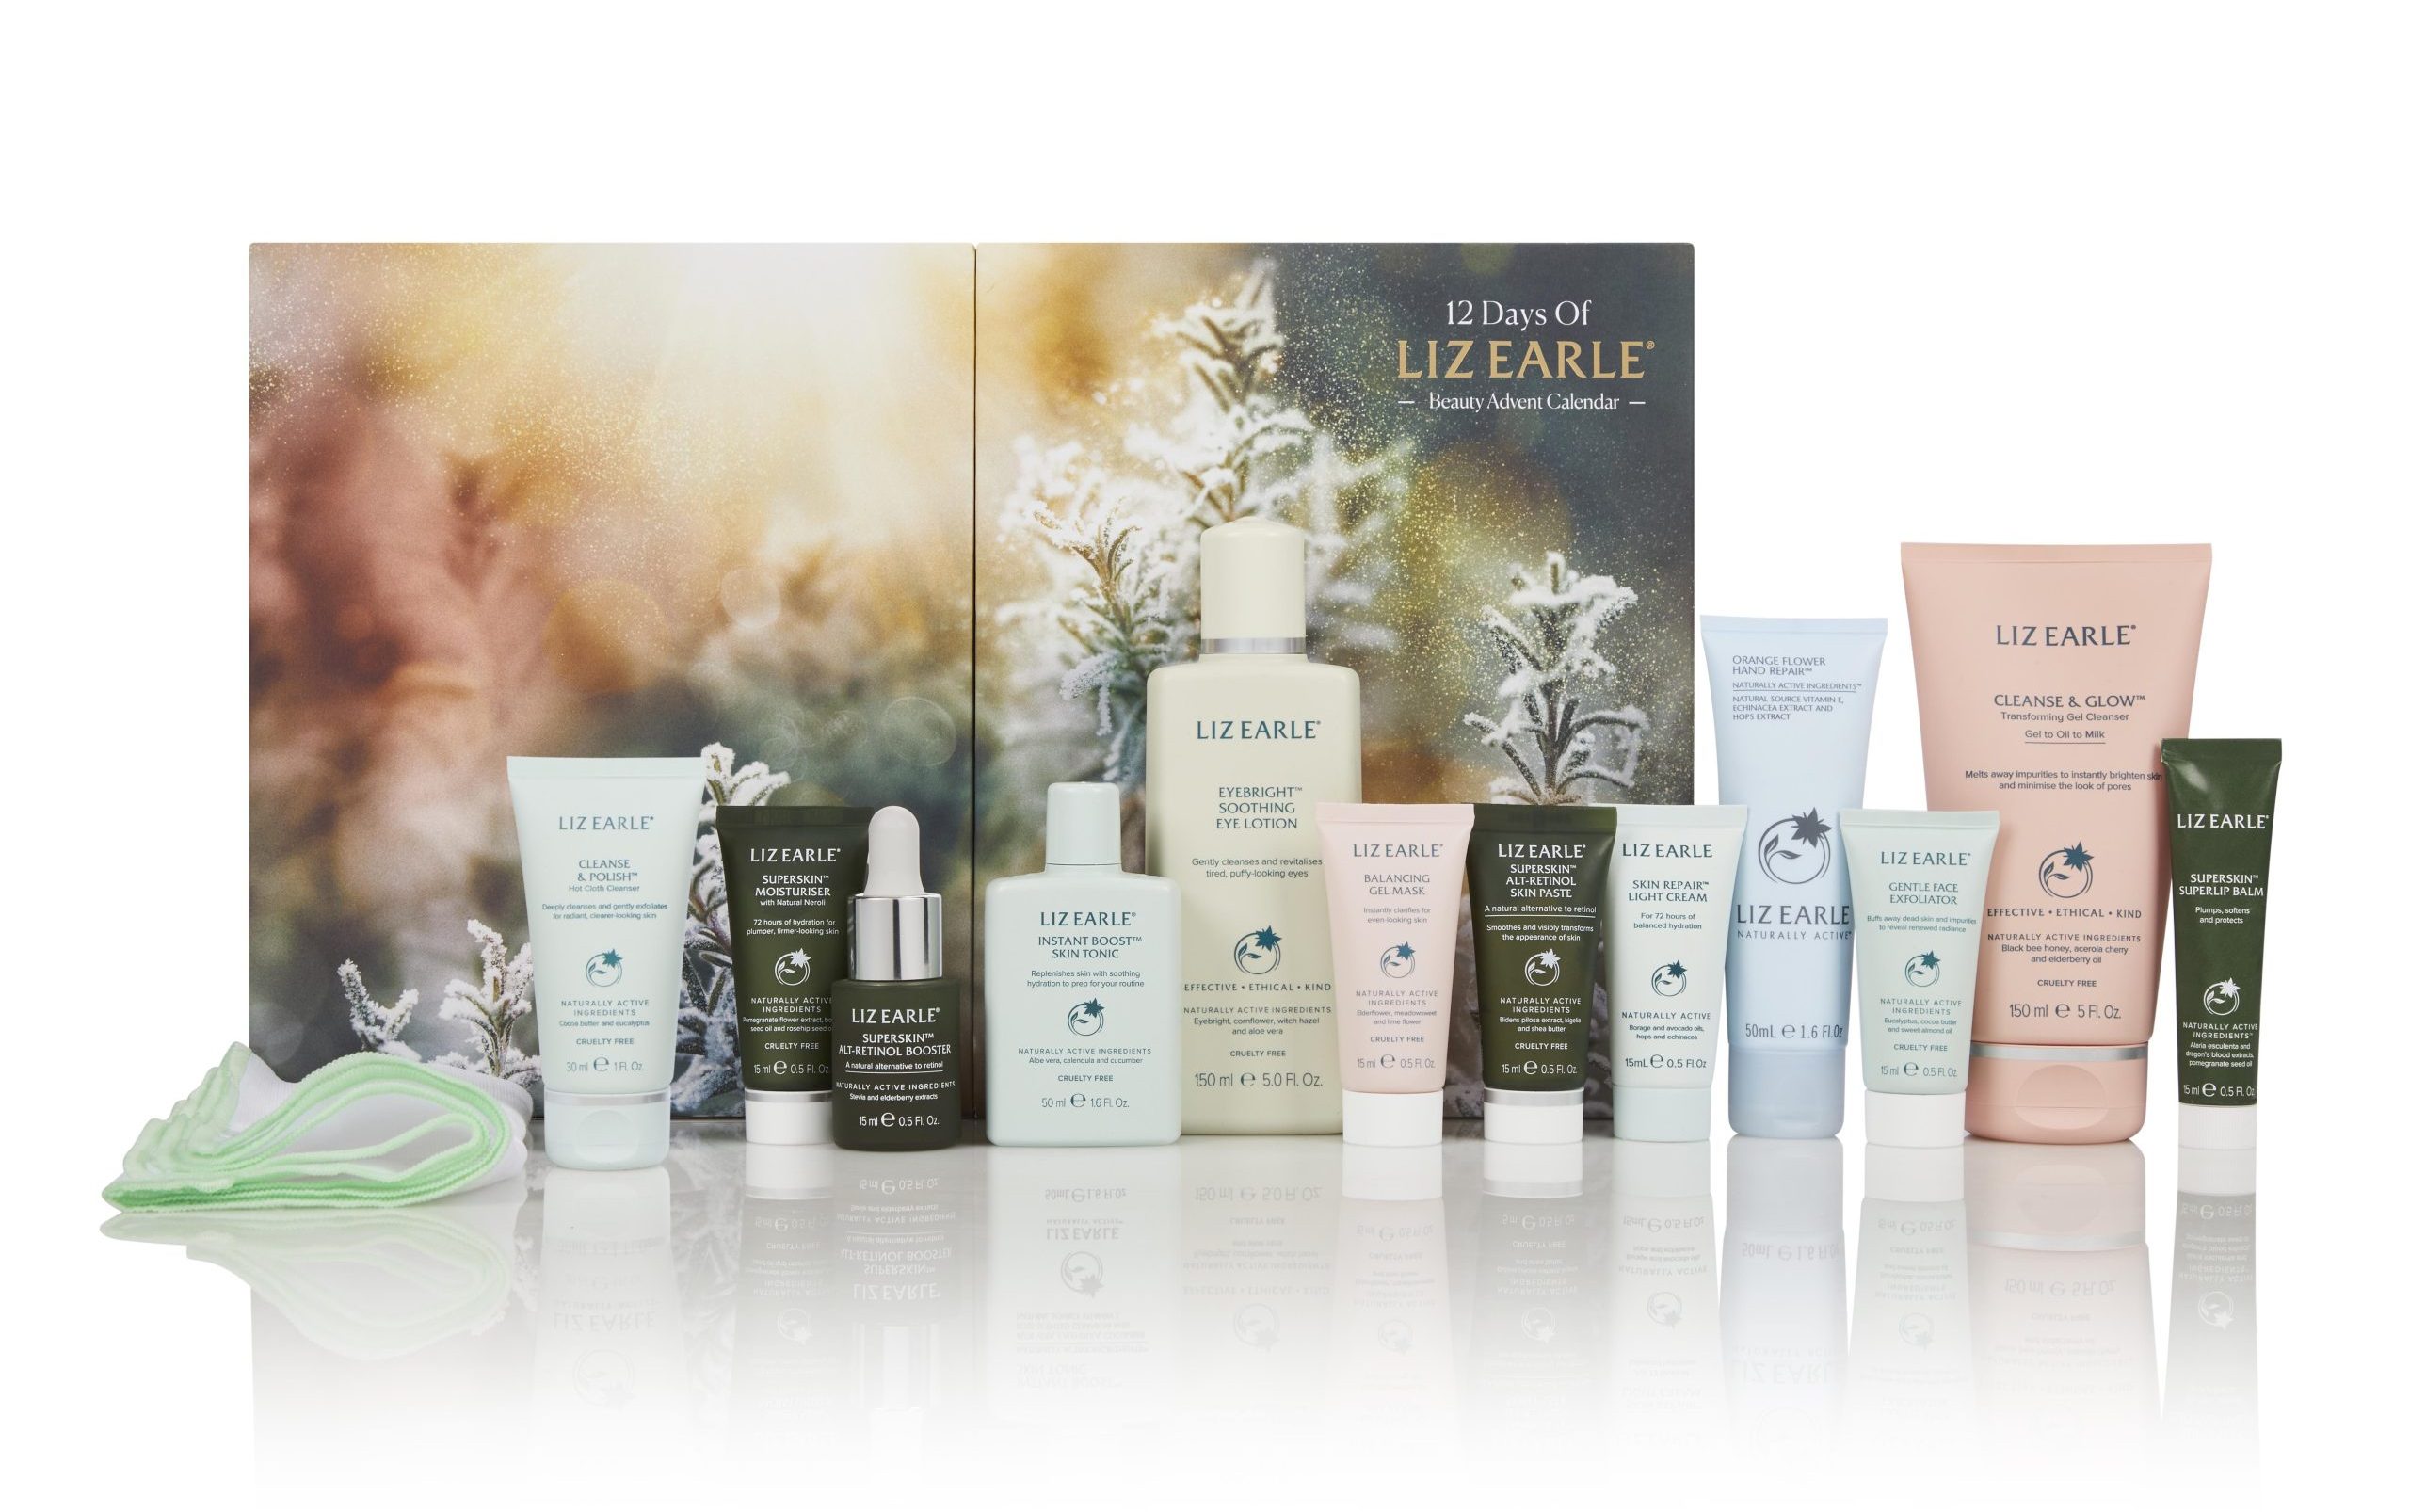 All the beauty products inside the 12 Days of Liz Earle Beauty Advent Calendar.